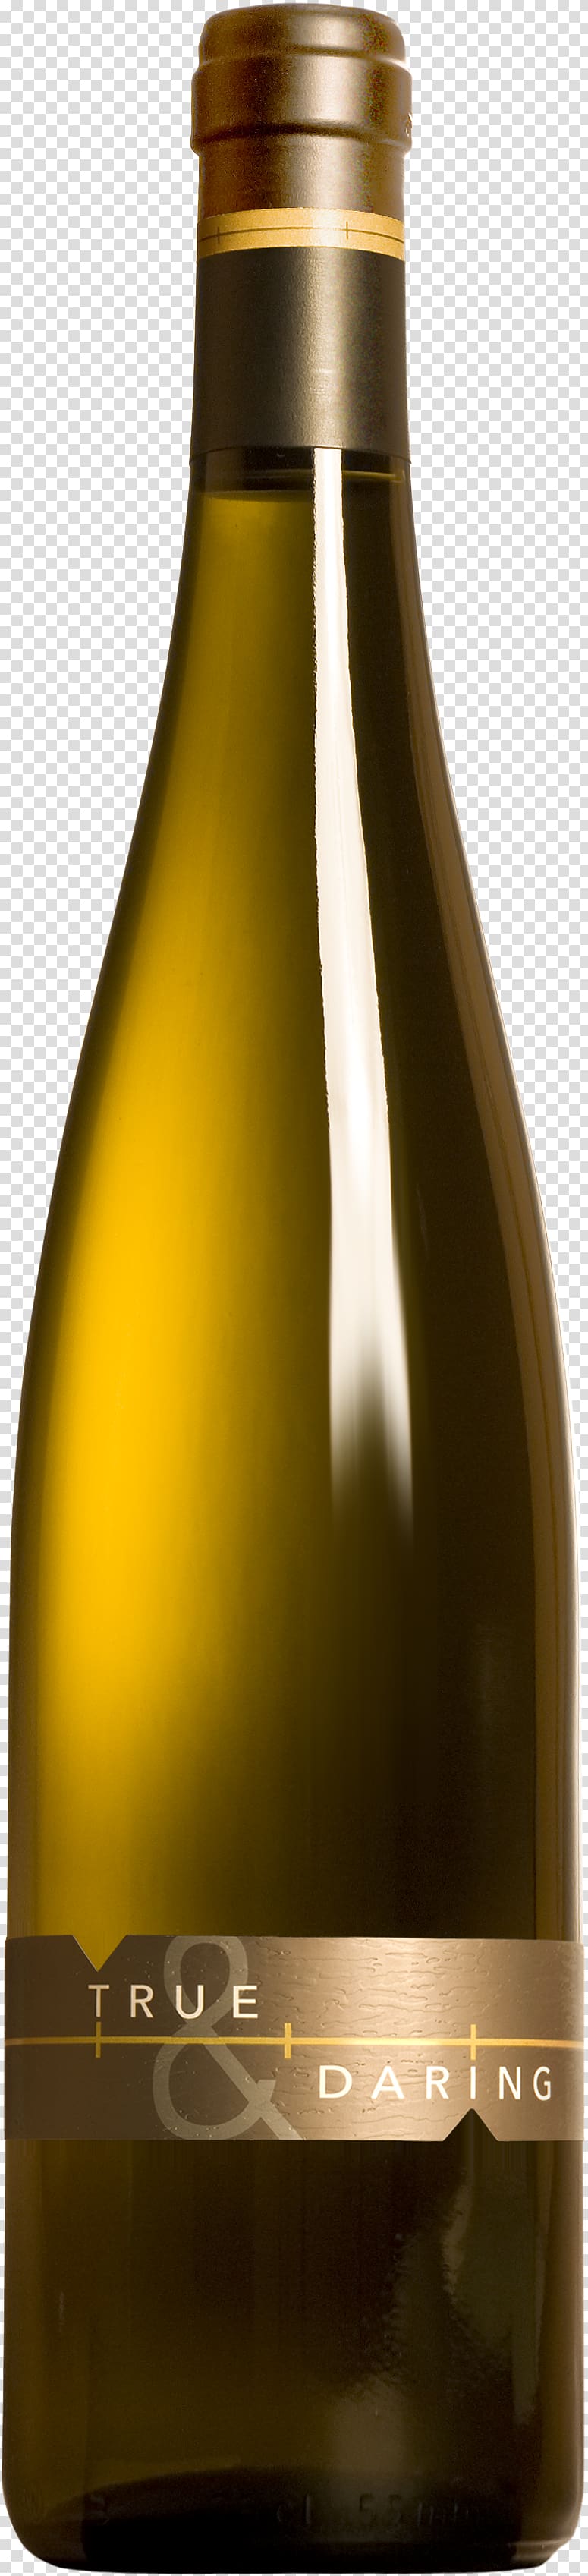 Ice wine Riesling Kendall-Jackson Vineyard Estates Chateau Ste. Michelle, Wine bottle transparent background PNG clipart